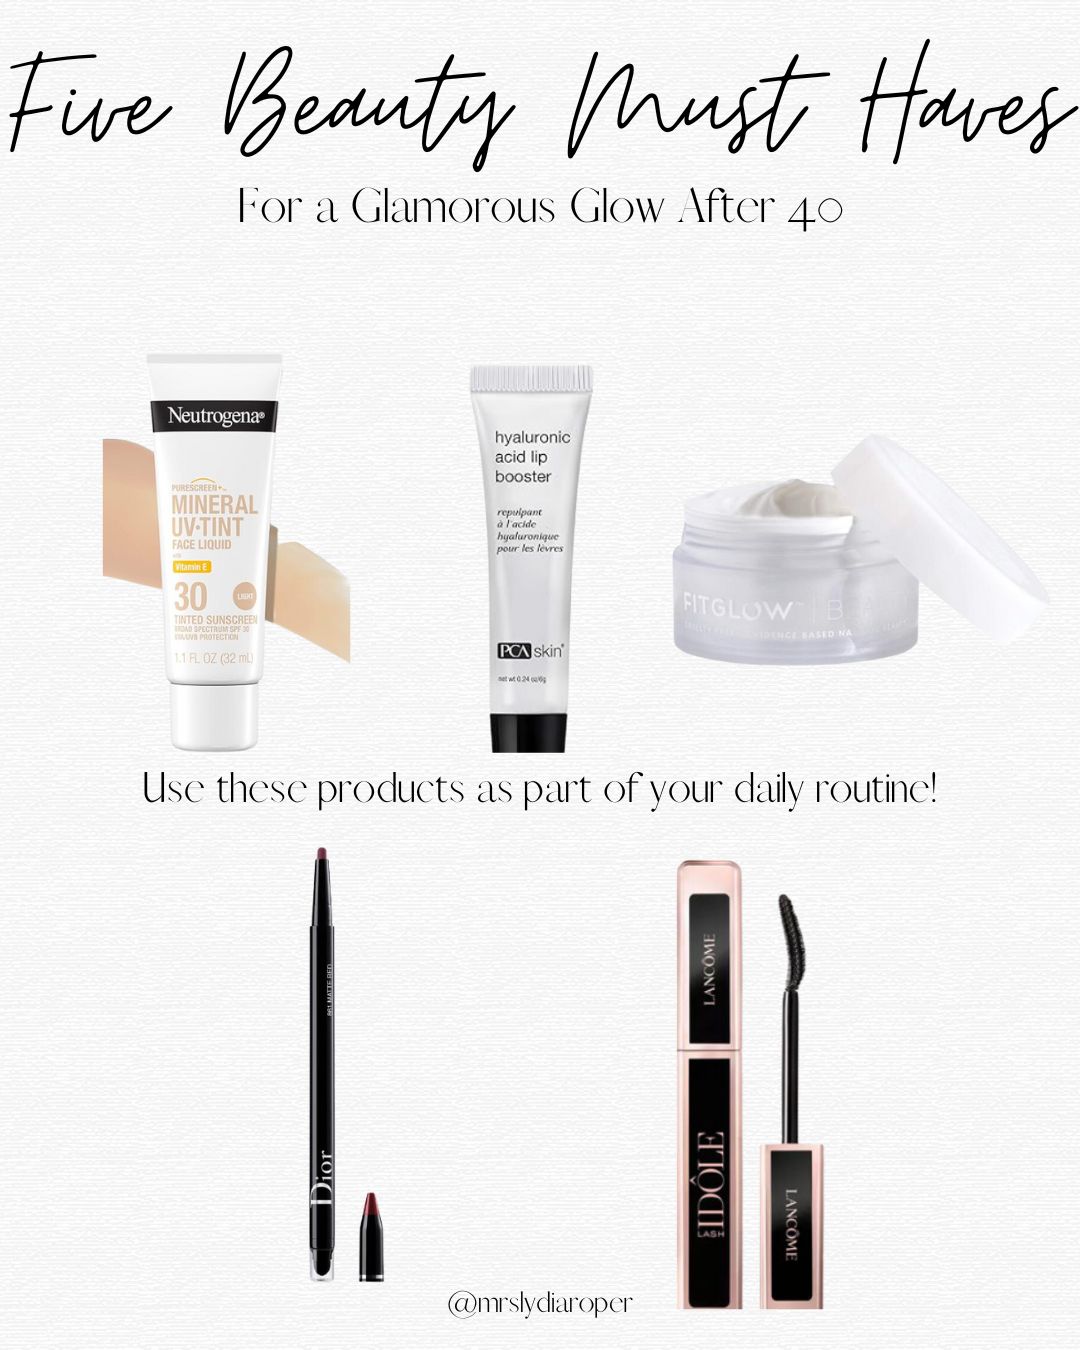 5 must have beauty products for a glamorous glow after 40